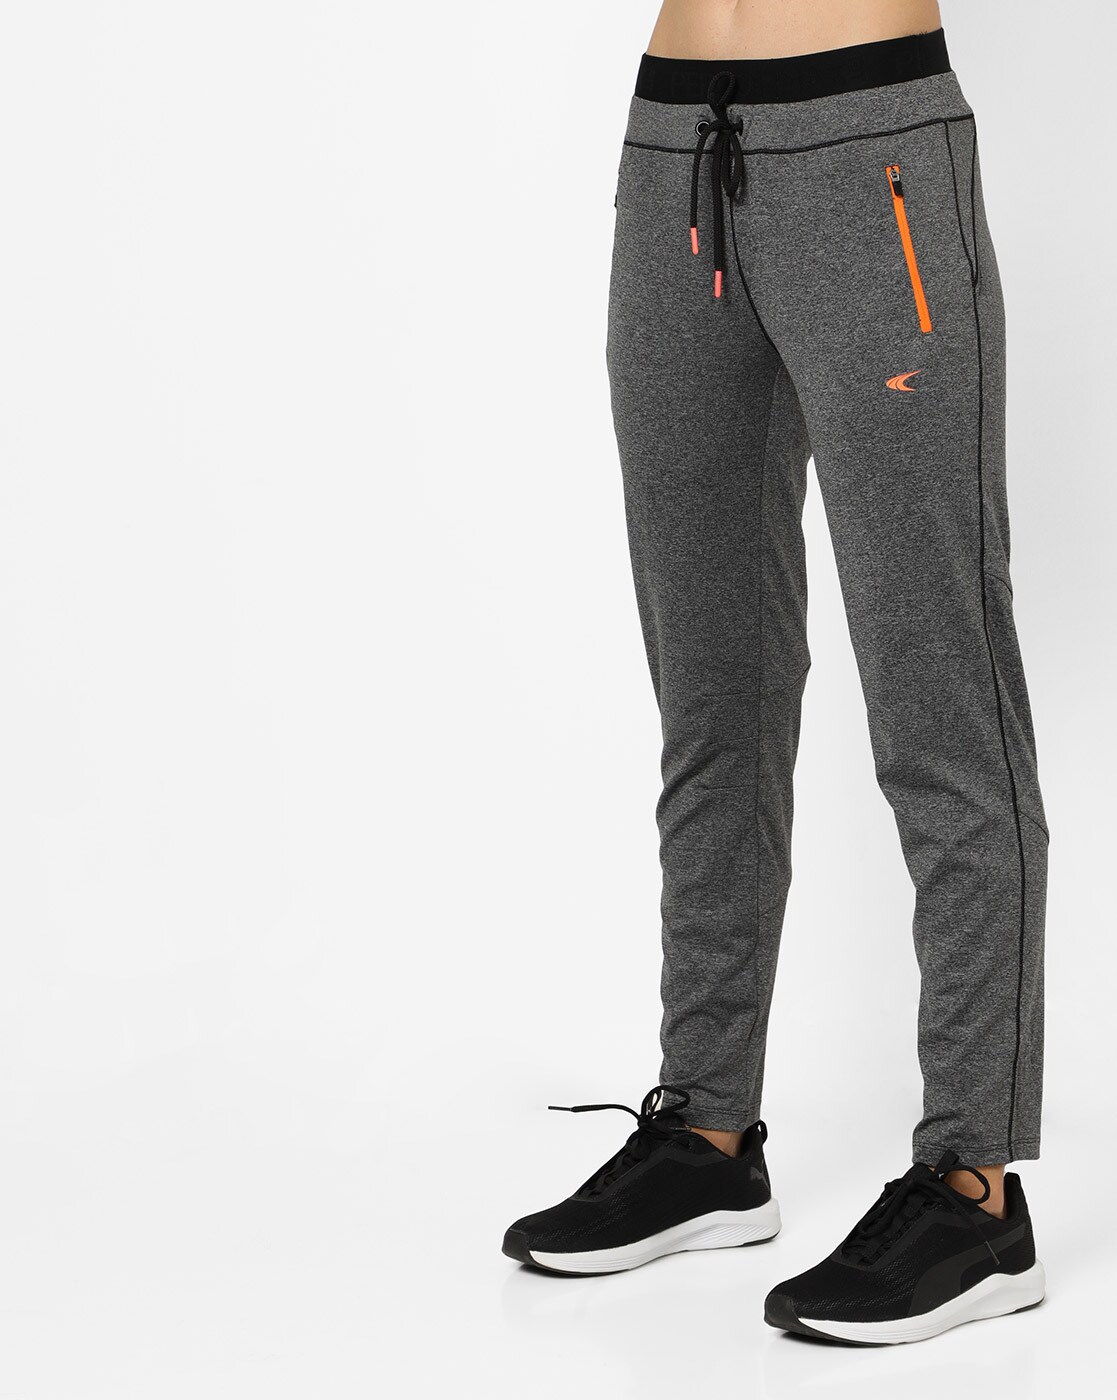 Buy Grey Track Pants for Women by PERFORMAX Online | Ajio.com